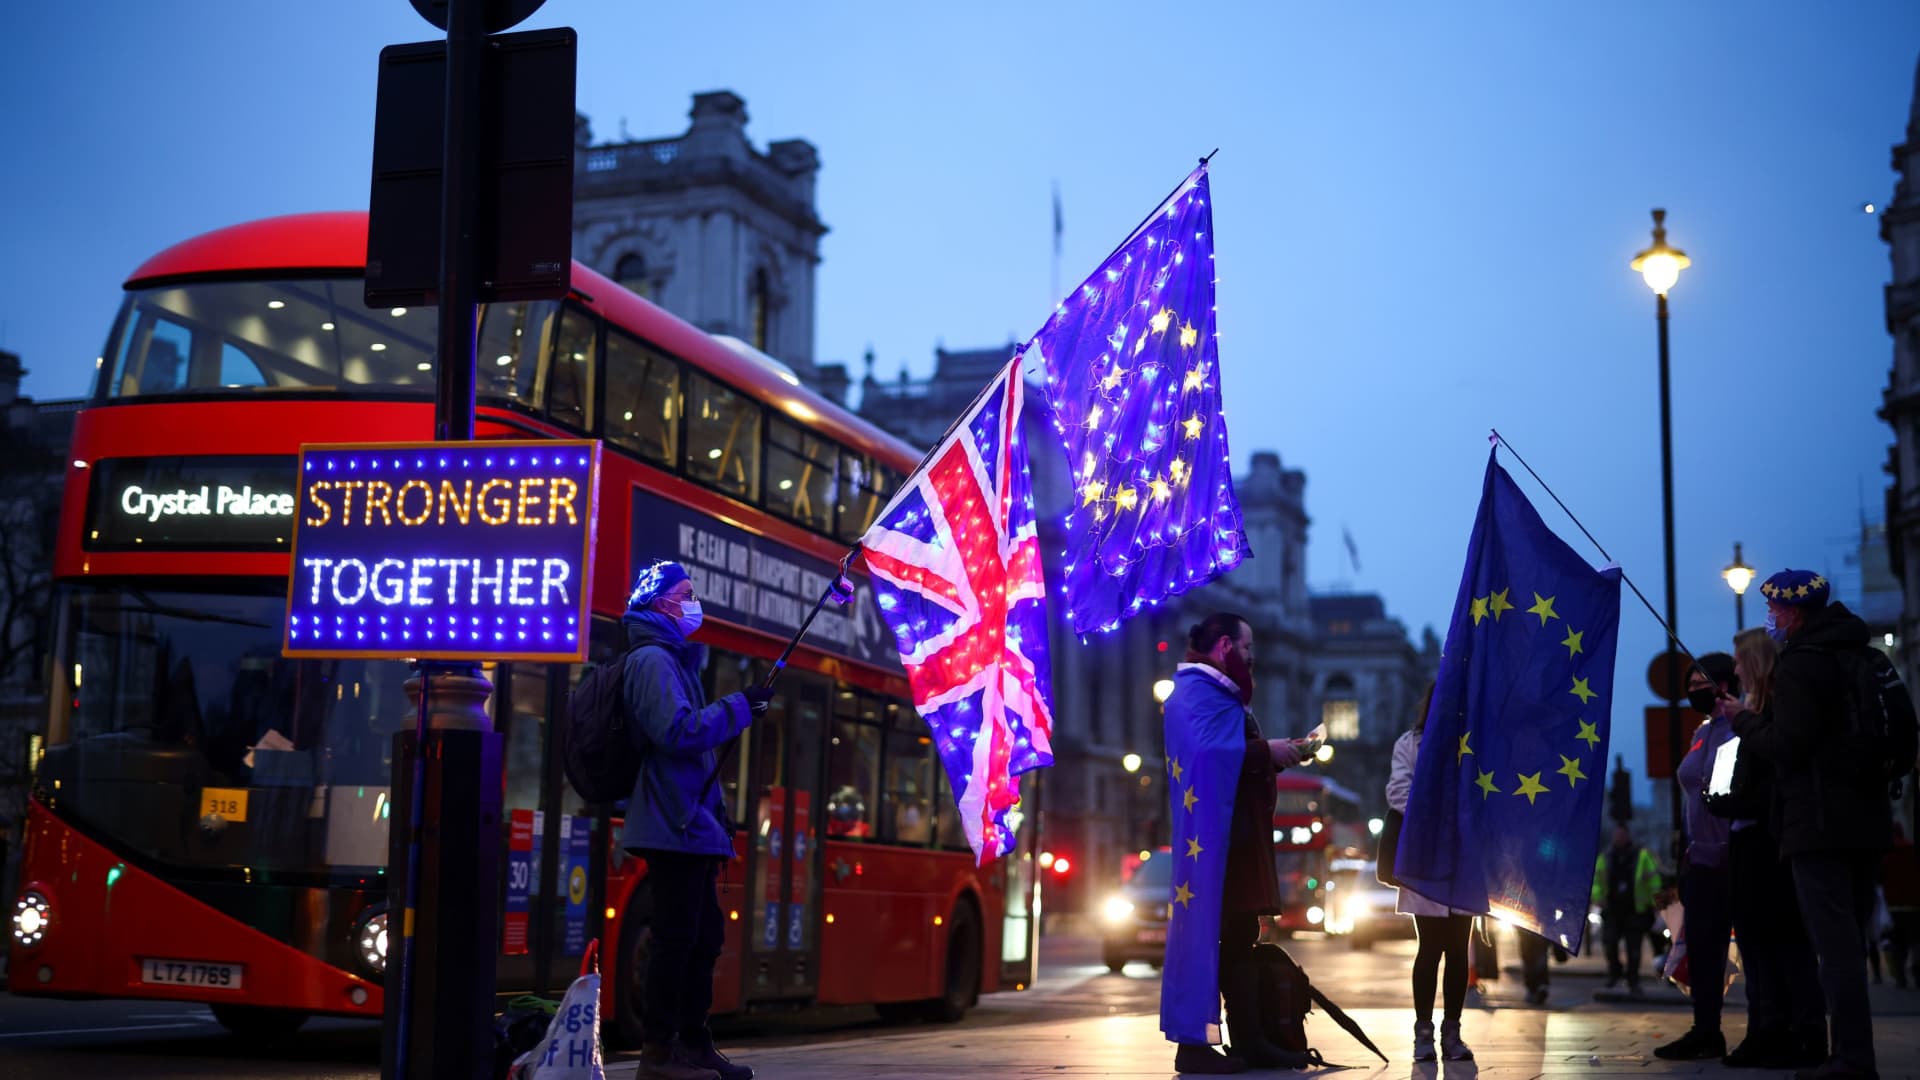 Anti-Brexit protesters demonstrate outside the Houses of Parliament in London, Britain December 9, 2020.